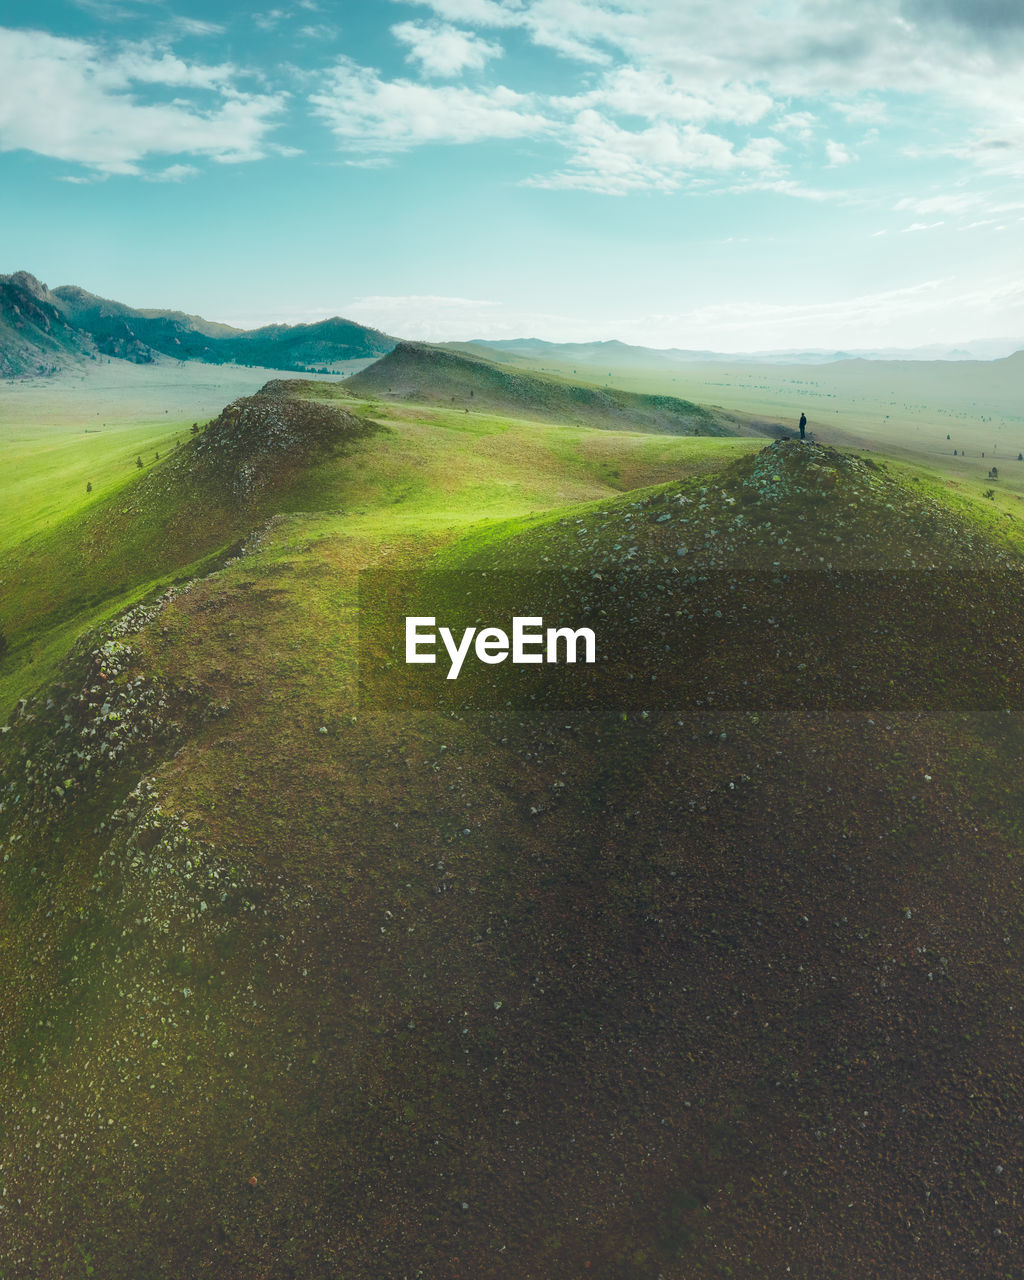 A man stands on a hill in a stunning landscape